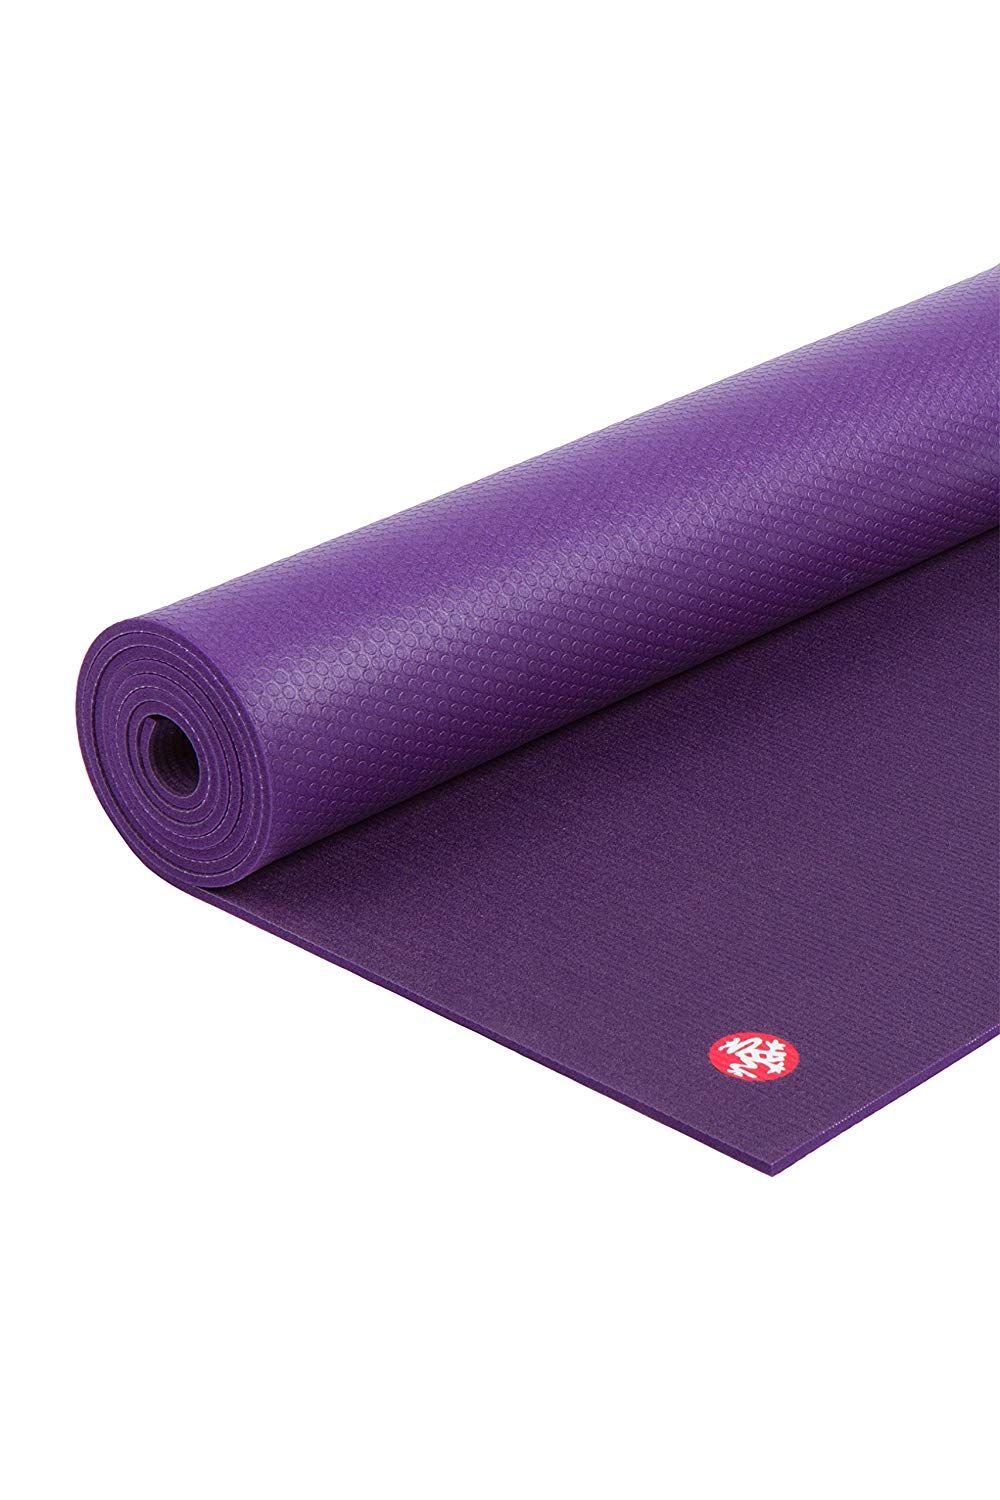 Which Yoga Mat Material Is Best